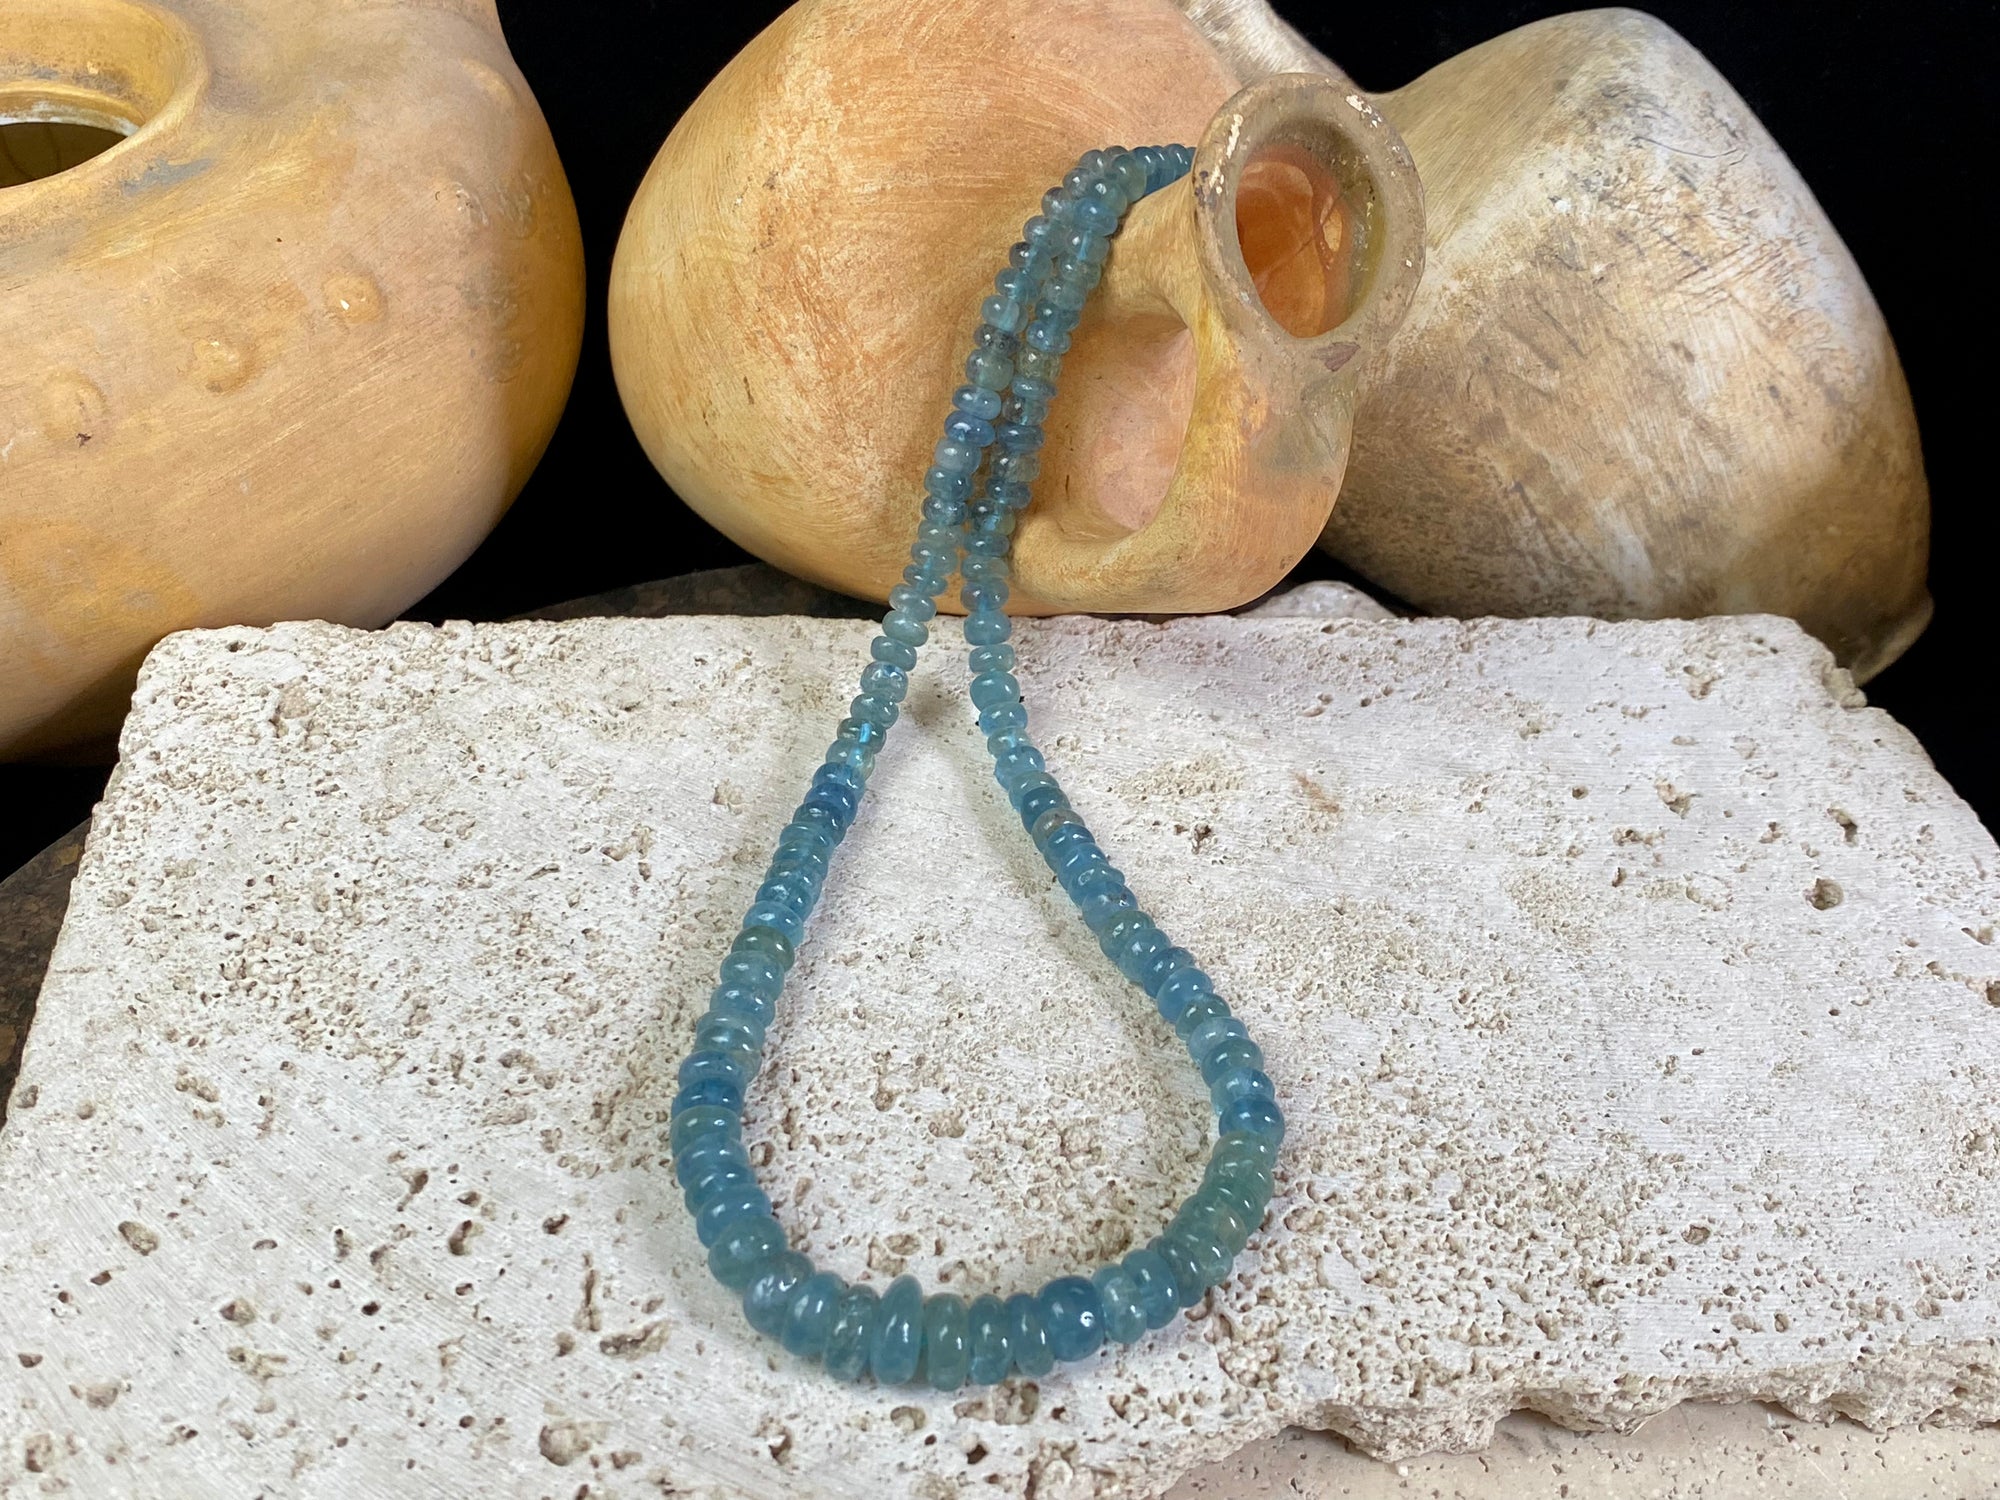 Natural aquamarine necklace featuring rondel cut graduated aquamarine. Sterling silver hook and ring clasp. The aquamarine beads are matched, graduated, 100% natural, of a deep cloudy sea blue. Measurements: 41.5 cm